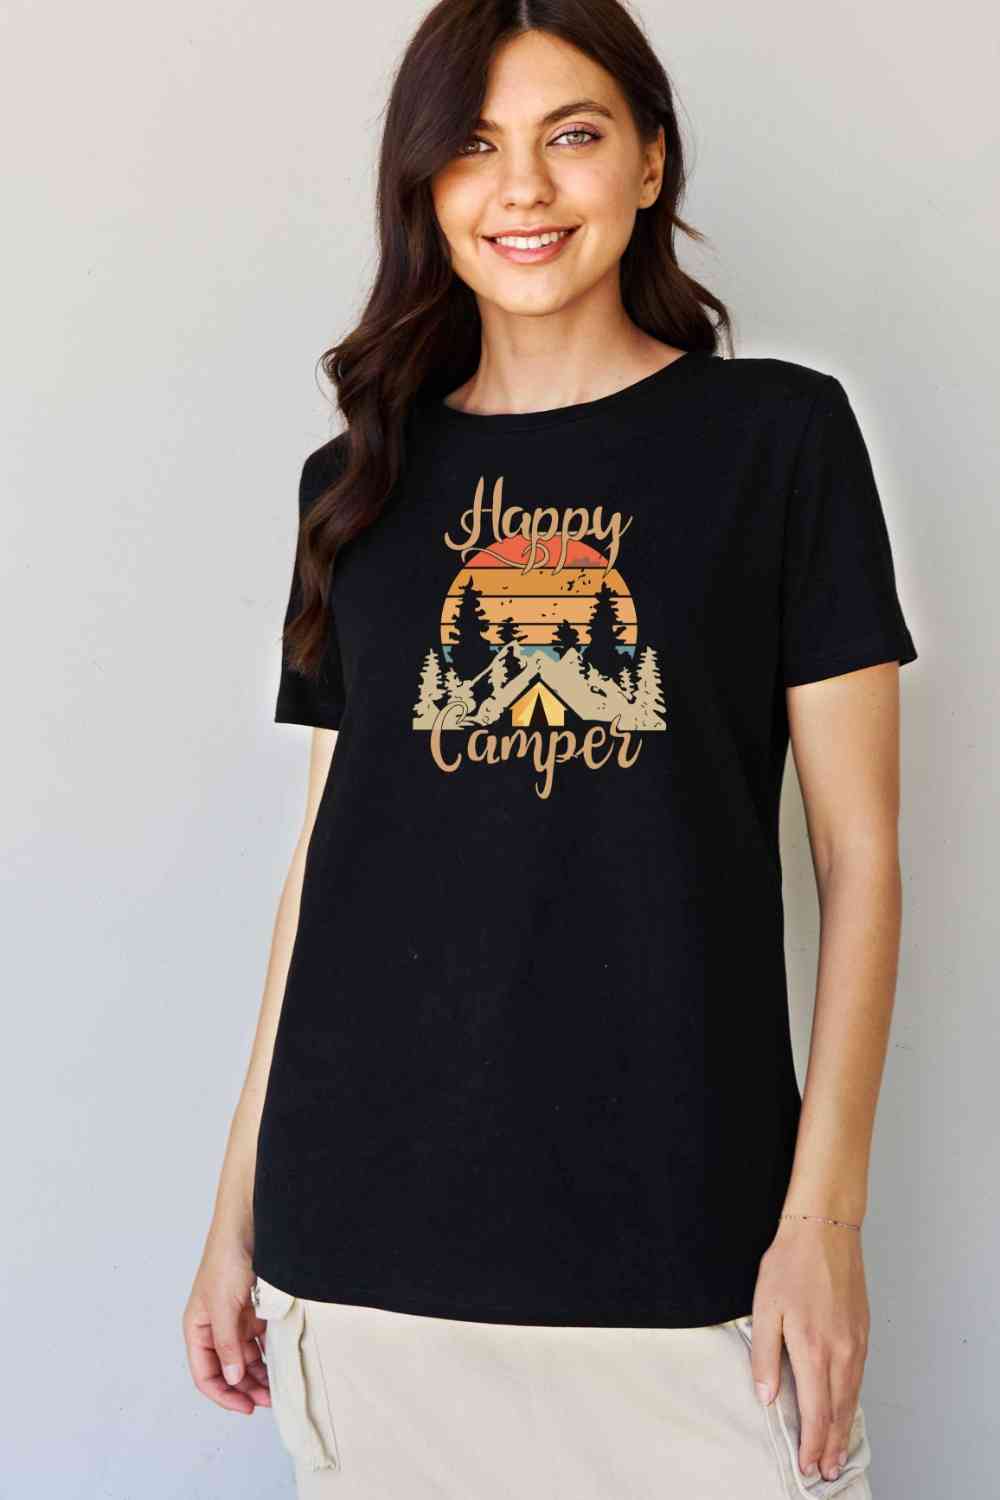 Simply Love Full Size HAPPY CAMPER Graphic T-Shirt